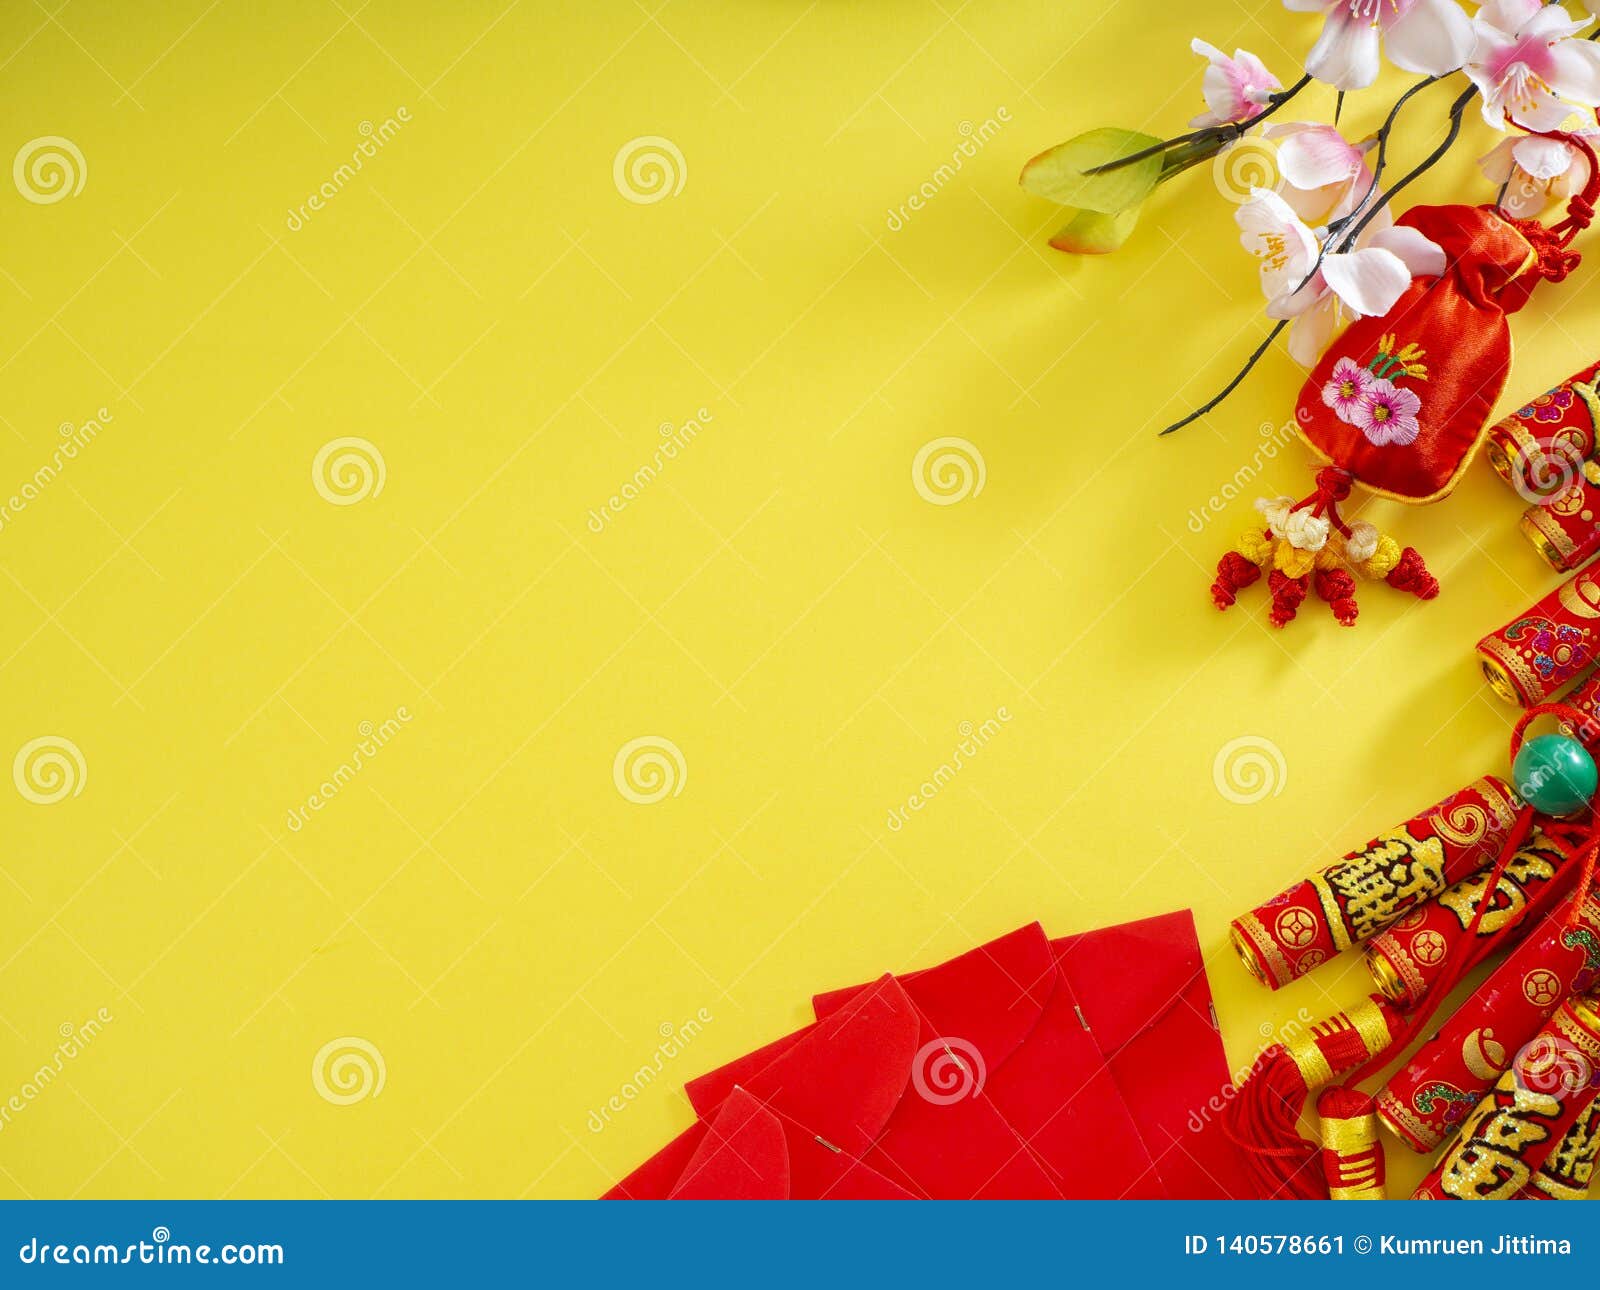 Chinese New Year Banner Background Stock Image - Image of space, yellow:  140578661